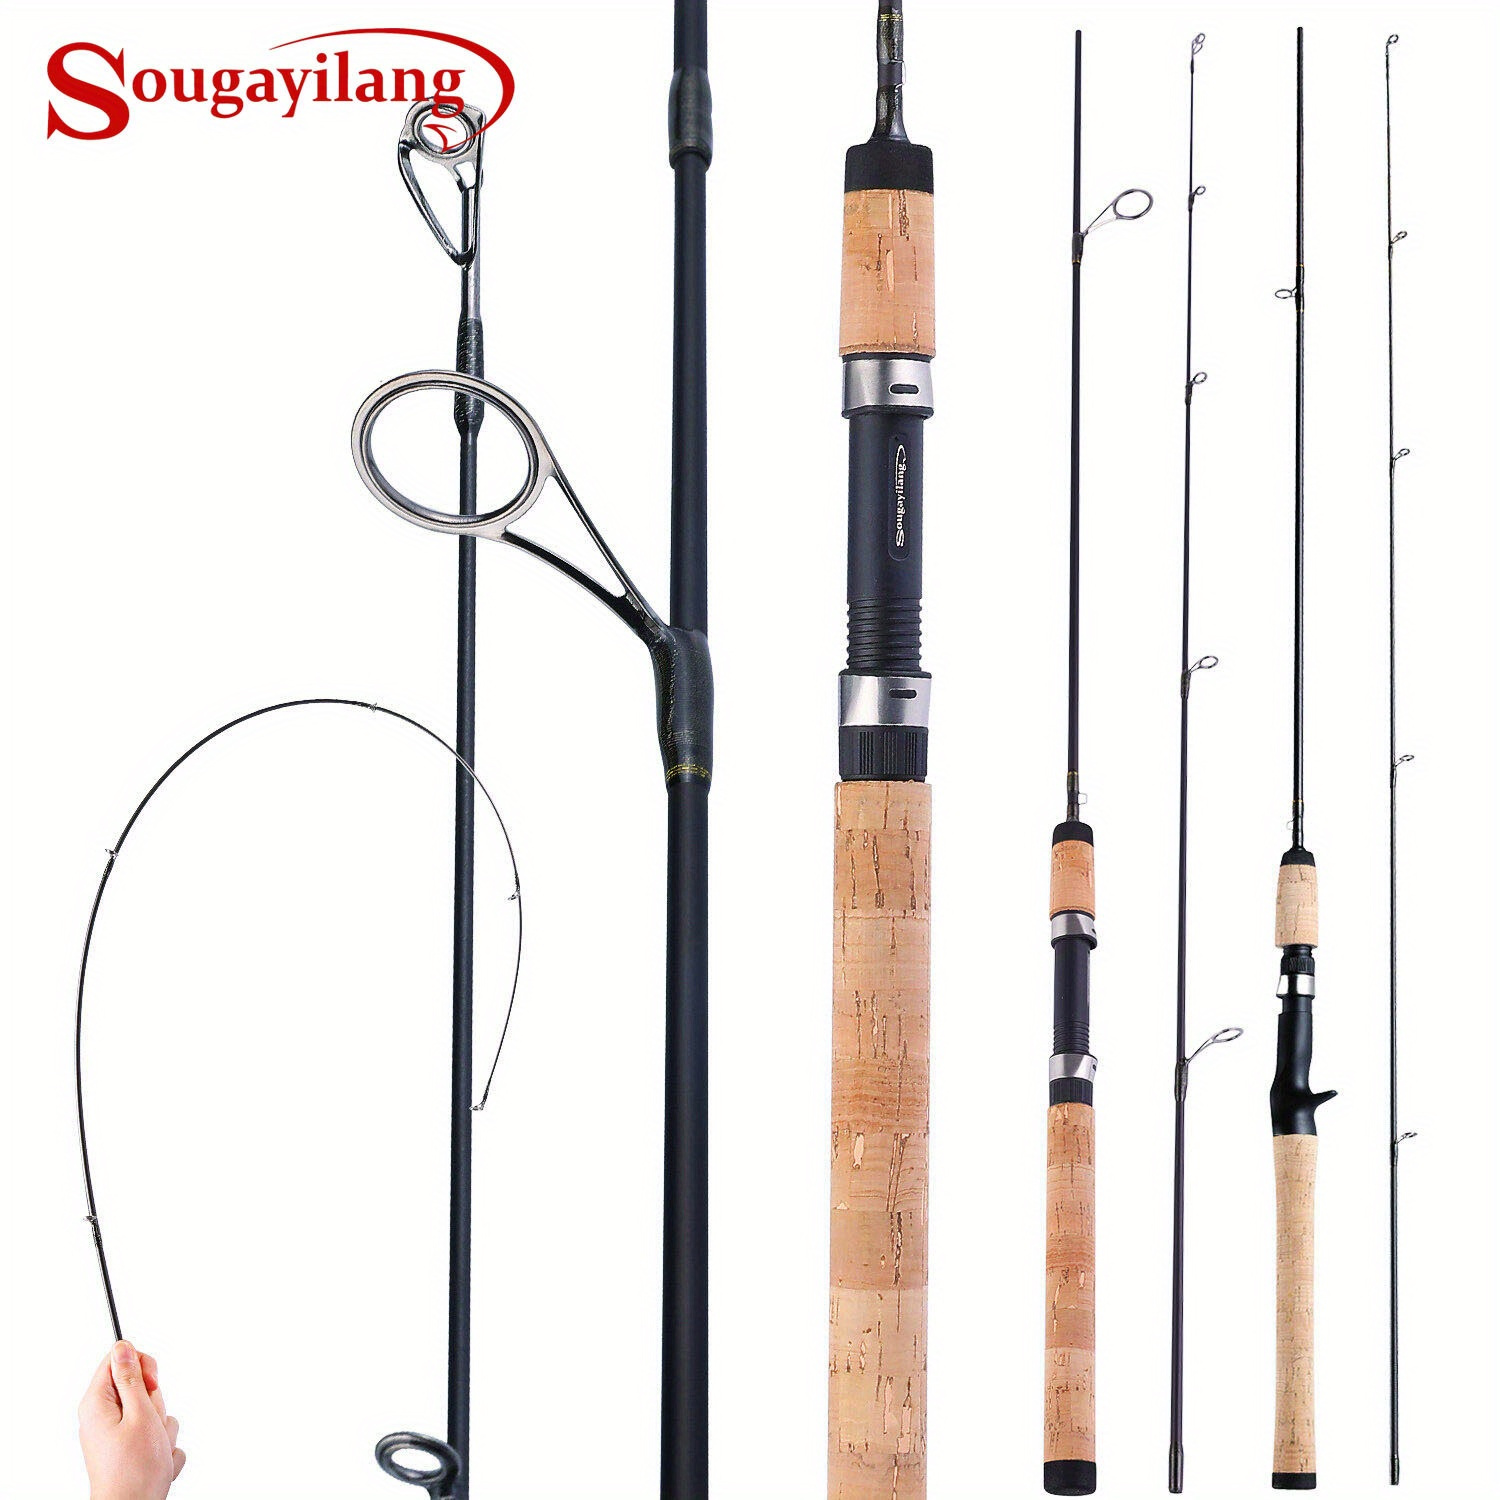 Sougayilang Casting Spinning Fishing Rod 2.1m Ultralight Carbon Fiber Rod  Pole 4 Section With Eva Handle Baitcasting Fishing Rod - Fishing Rods -  AliExpress